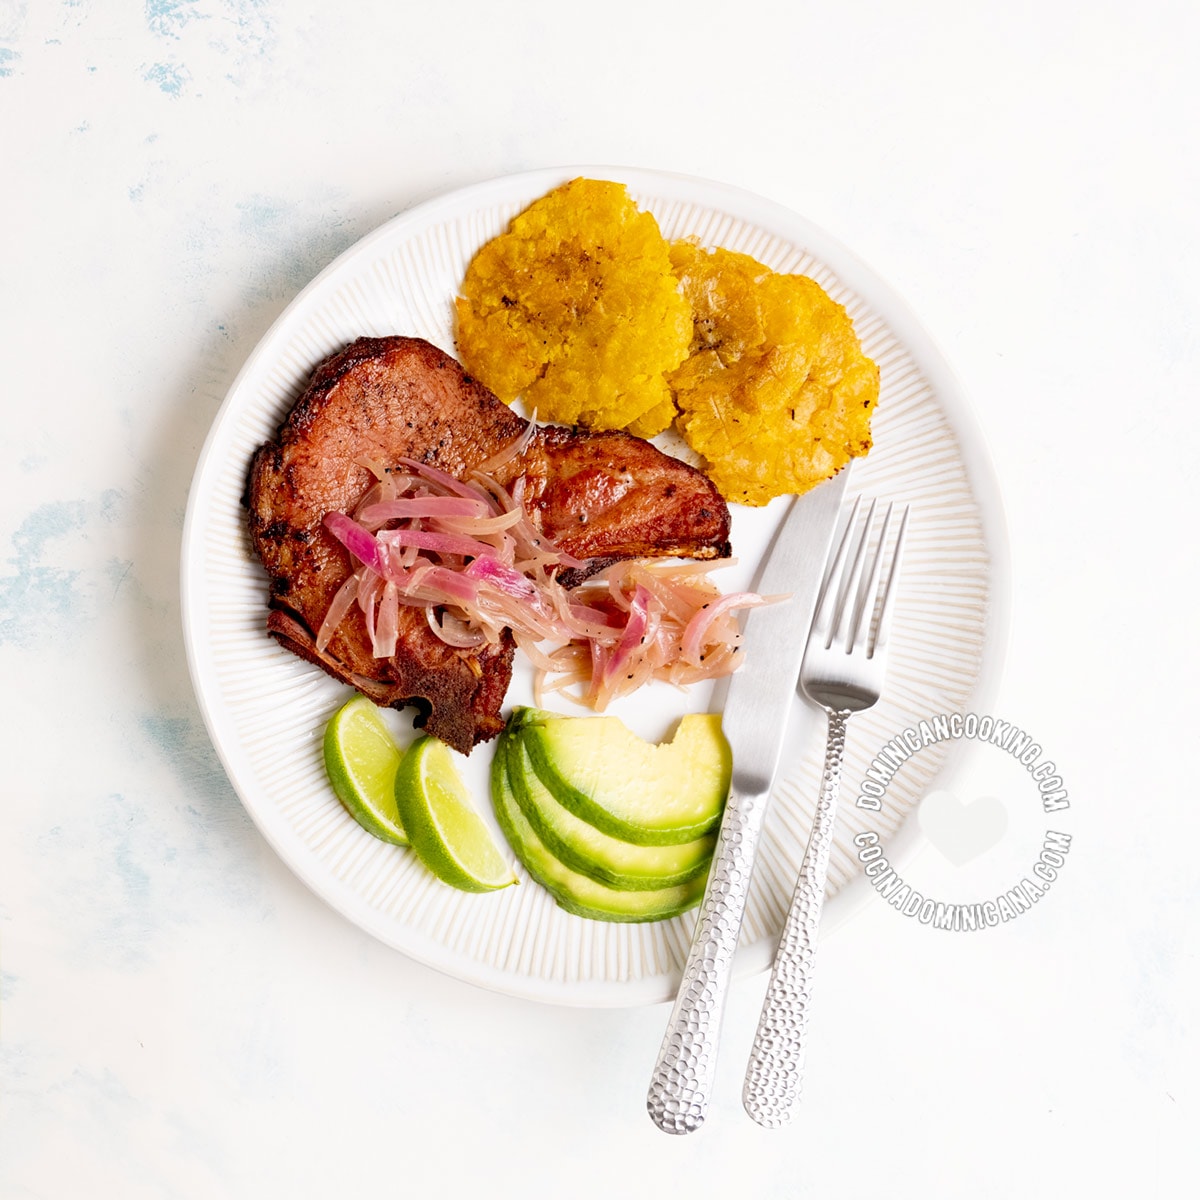 Chuletas fritas (Dominican Fried smoked oork chops) with tostones and avocado.